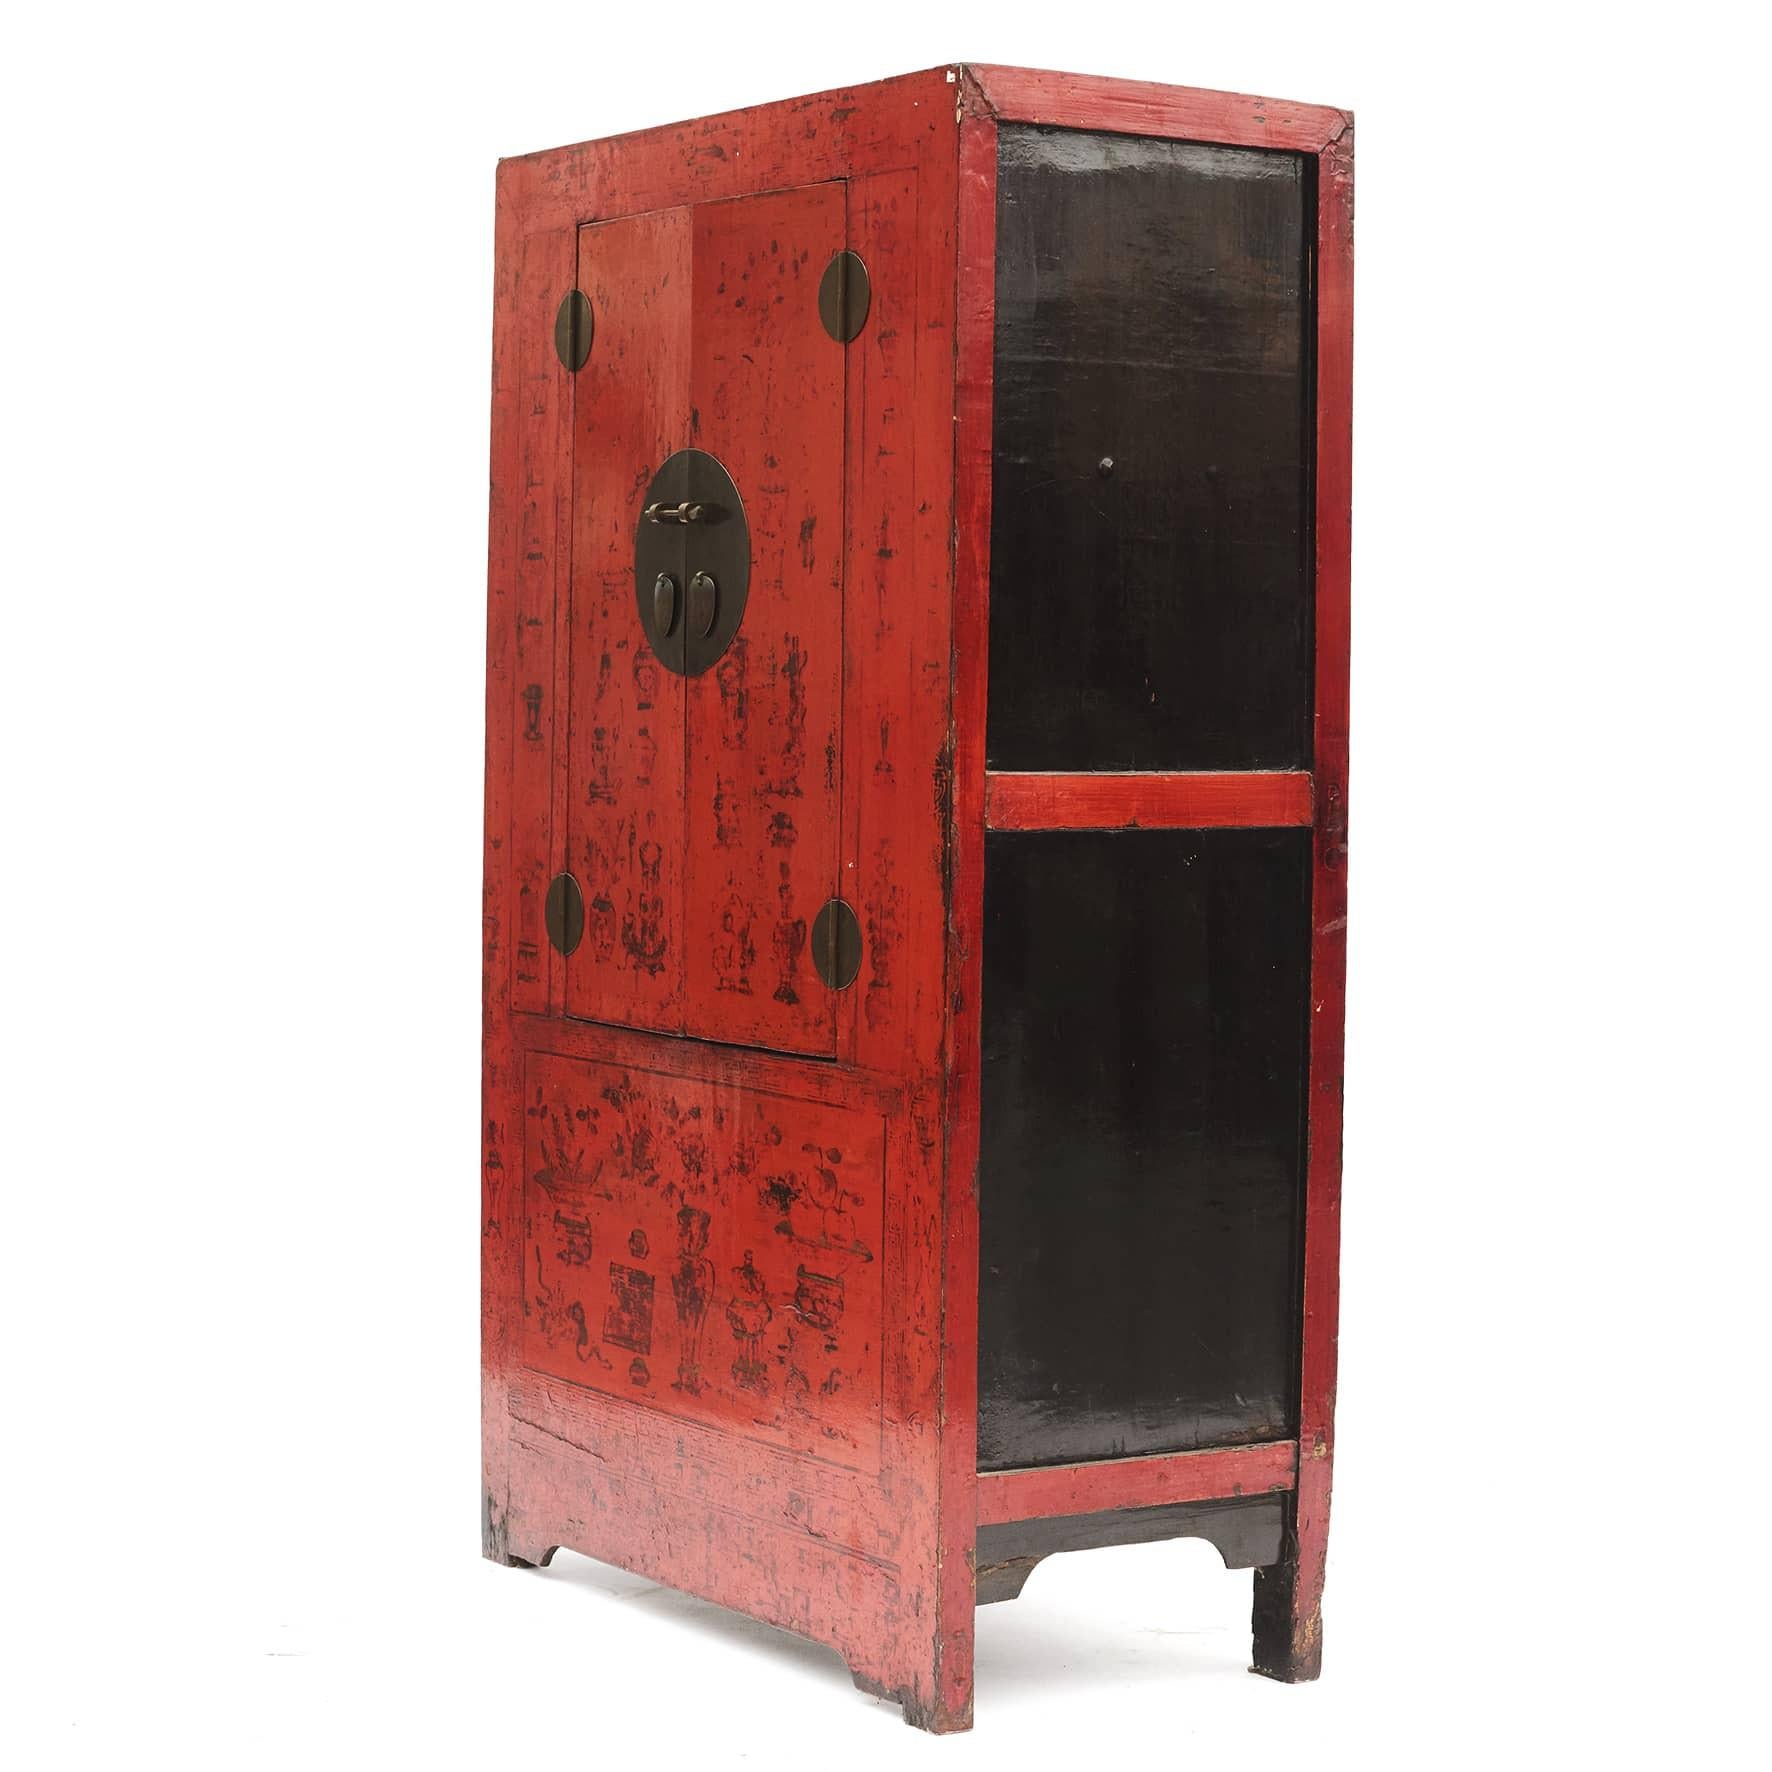 Chinese cabinet i red lacquer with remains of decorations, which gives the cabinet a beautiful patina. Black lacquer on the sides of the cabinet.
Features double doors, beautifully accented with a circular face plate. Behind the doors are two